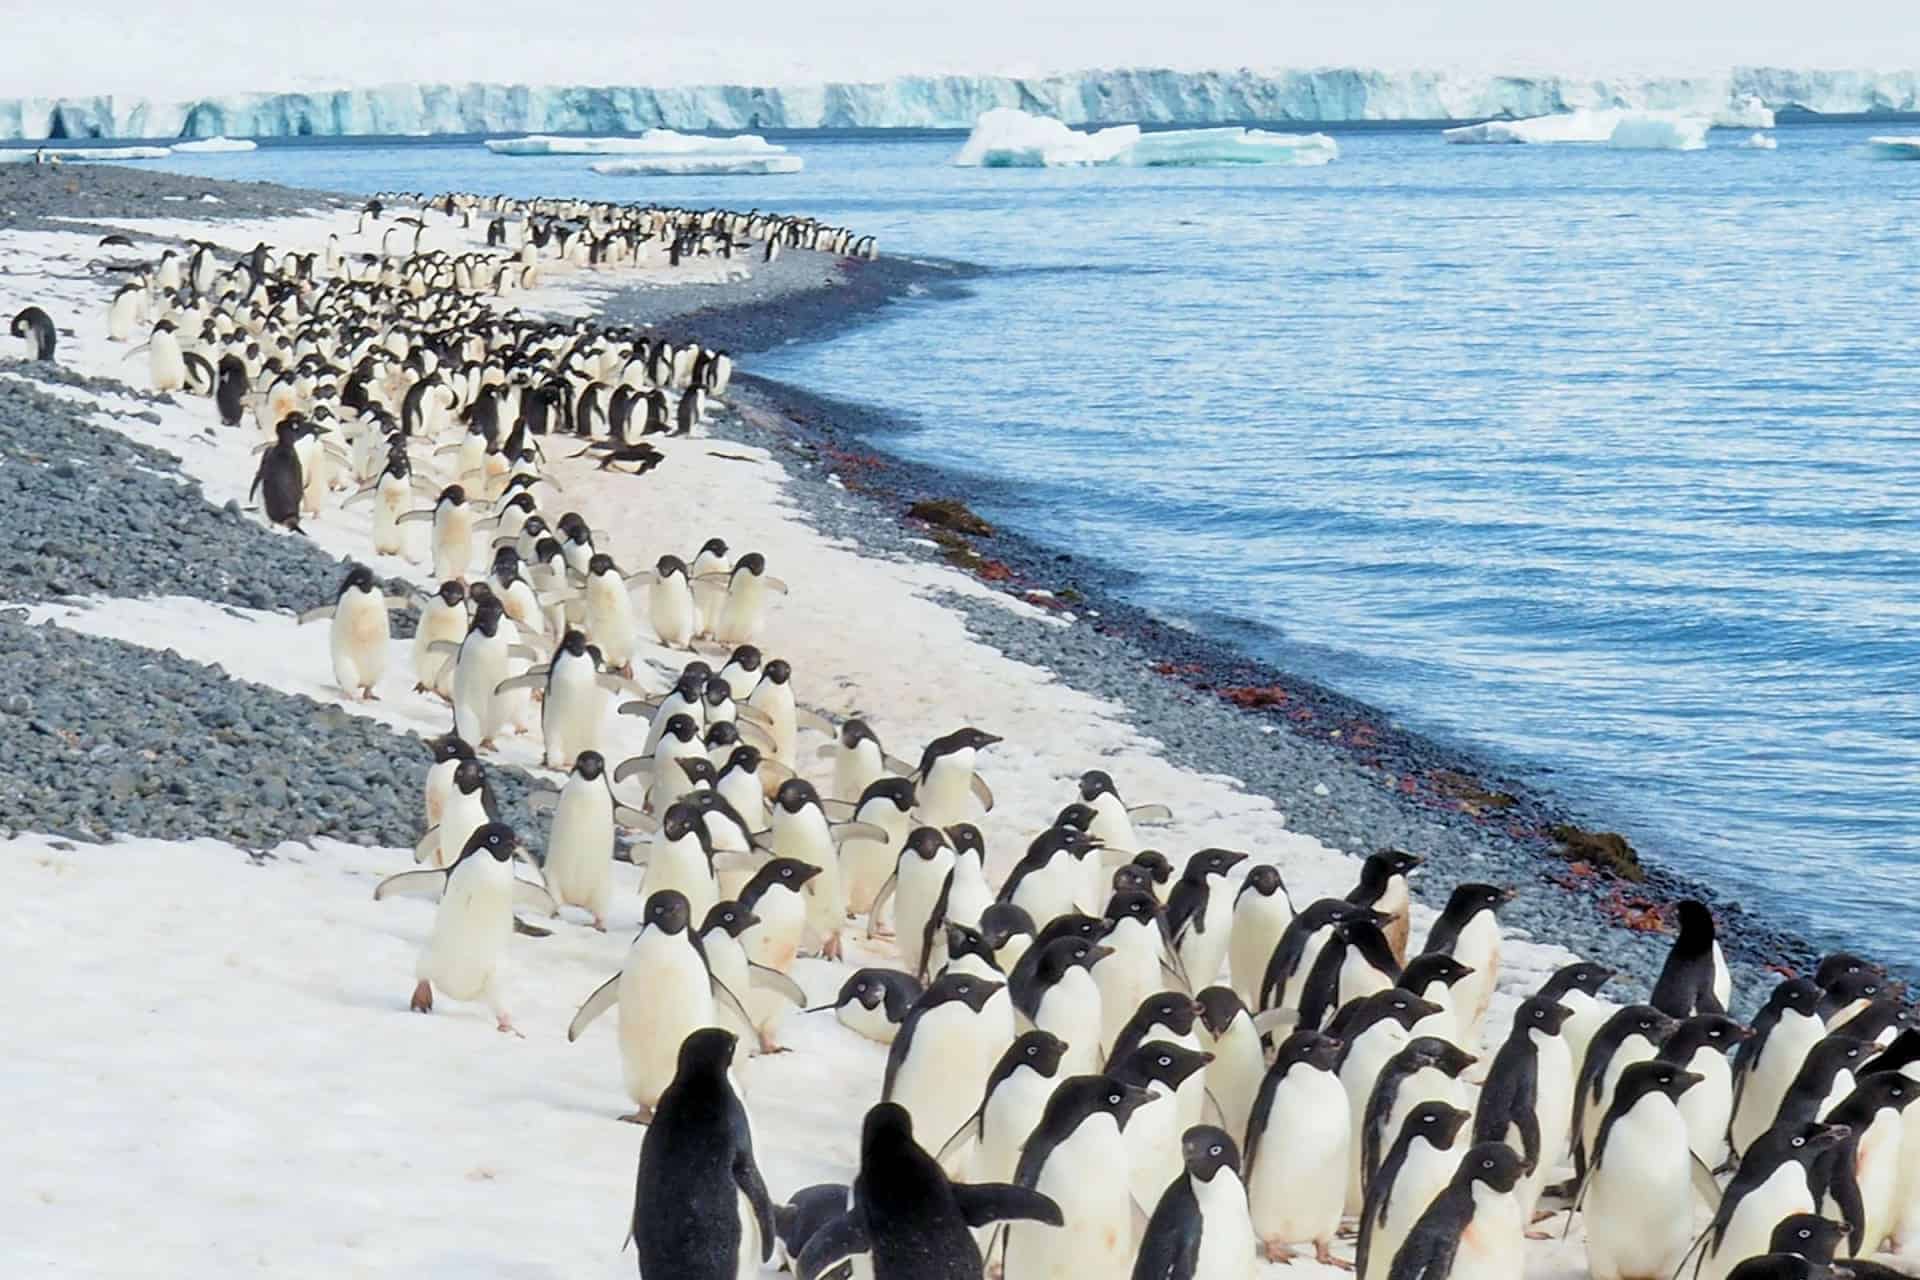 A large group of penguins is called a raft if they are in water, but a waddle if they are on land.